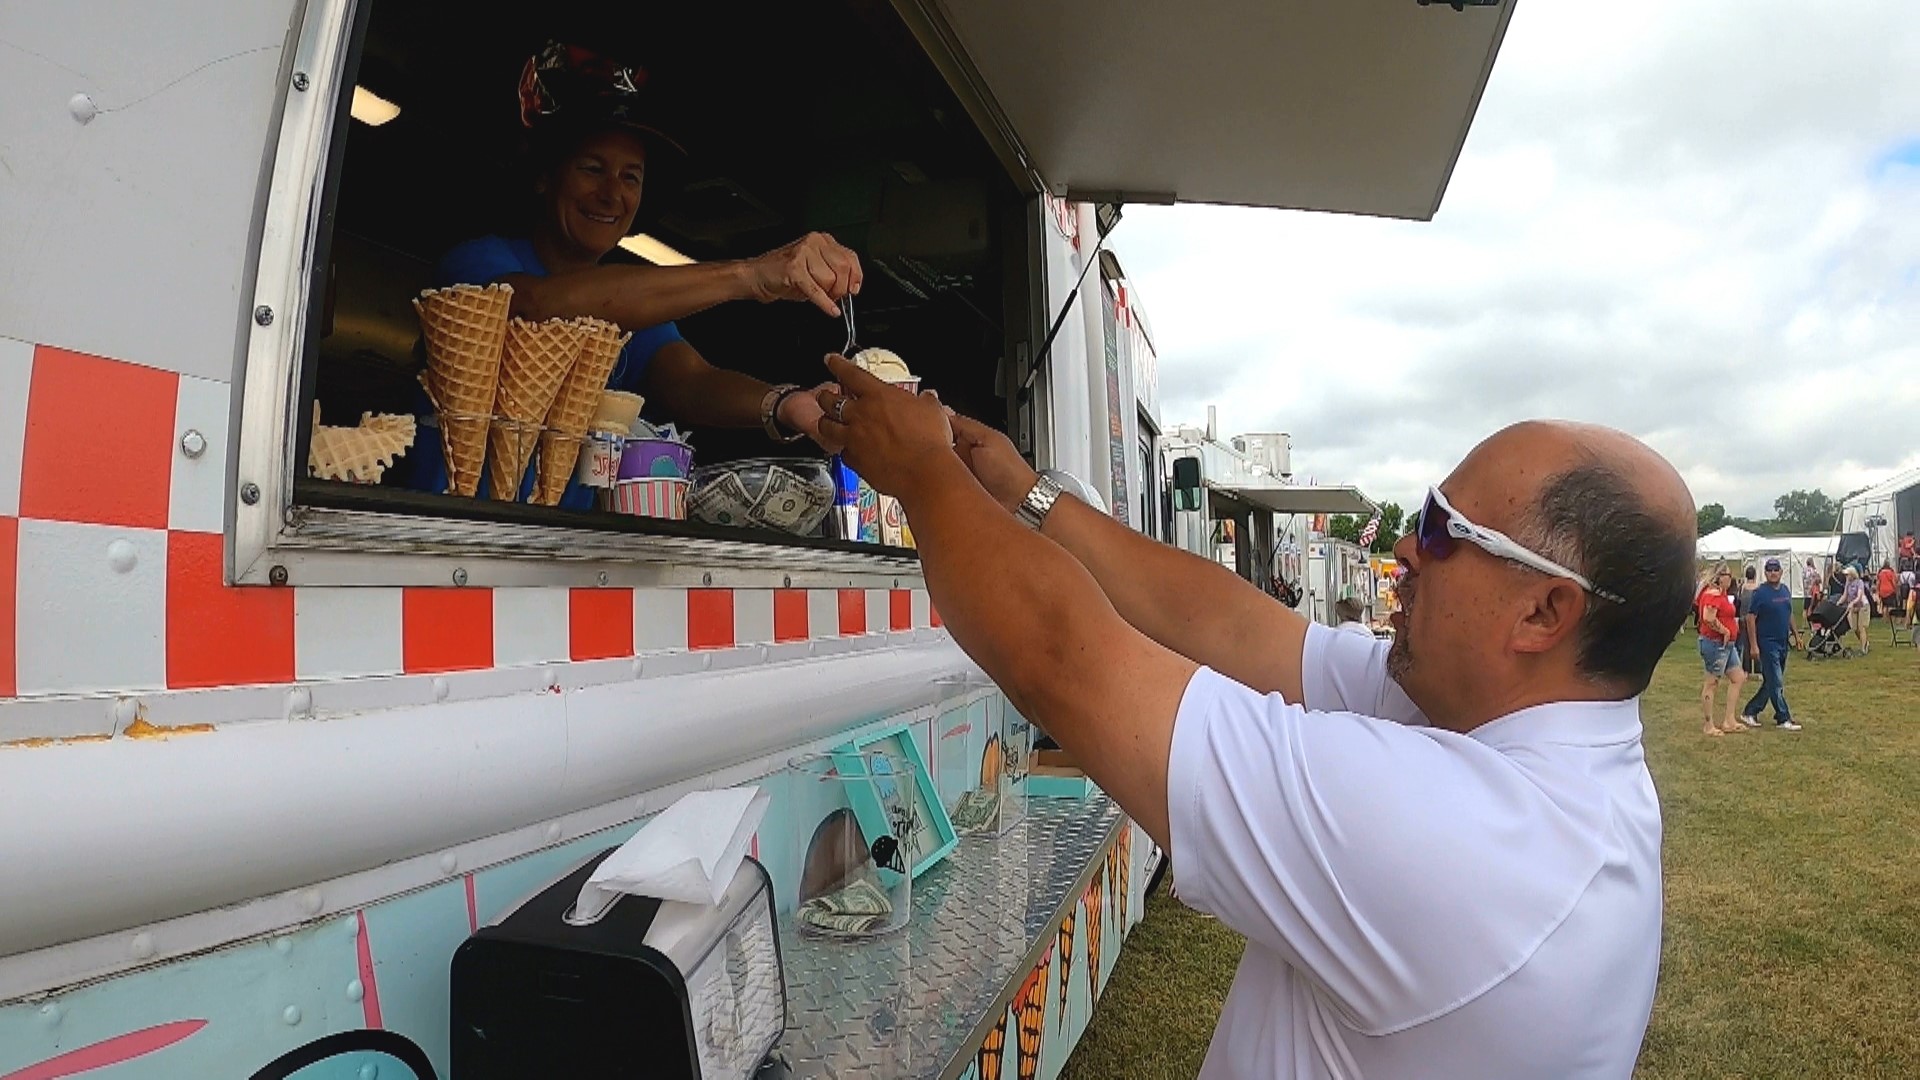 Inflation is hitting food truck owners hard this summer, impacting everything from food to gas prices.